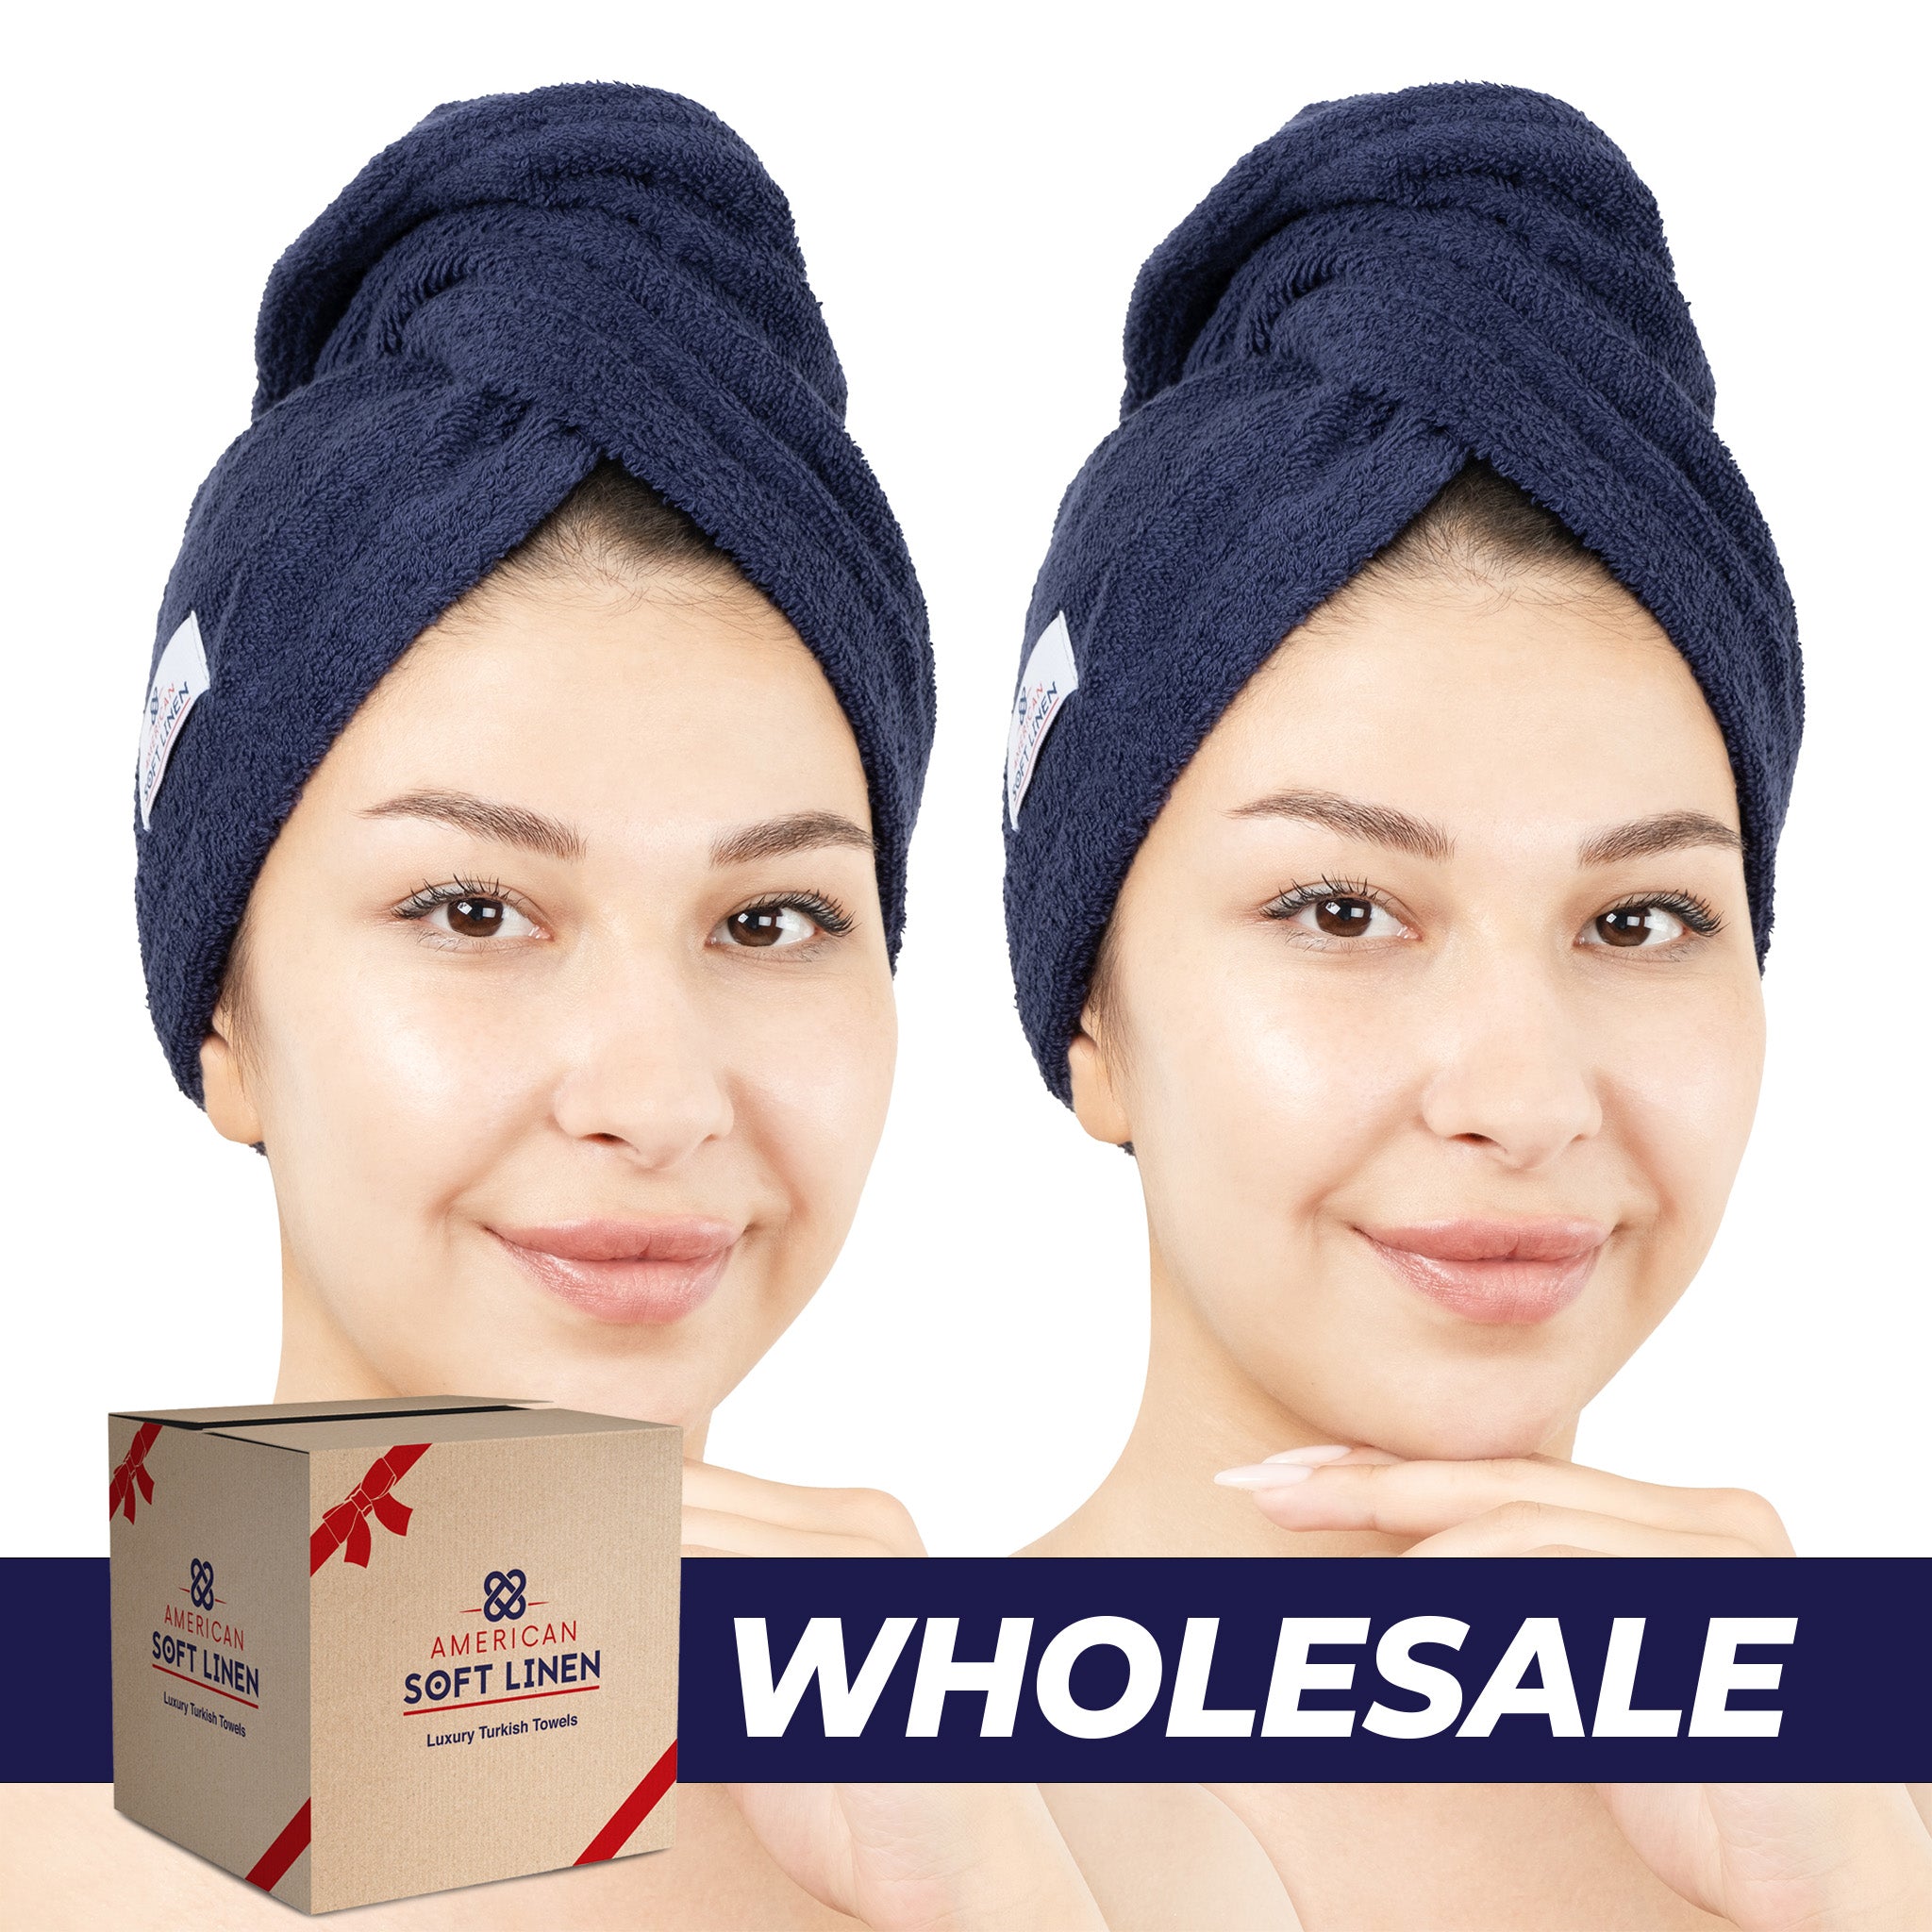 American Soft Linen 100% Cotton Hair Drying Towels for Women 2 pack 75 set case pack navy blue-0